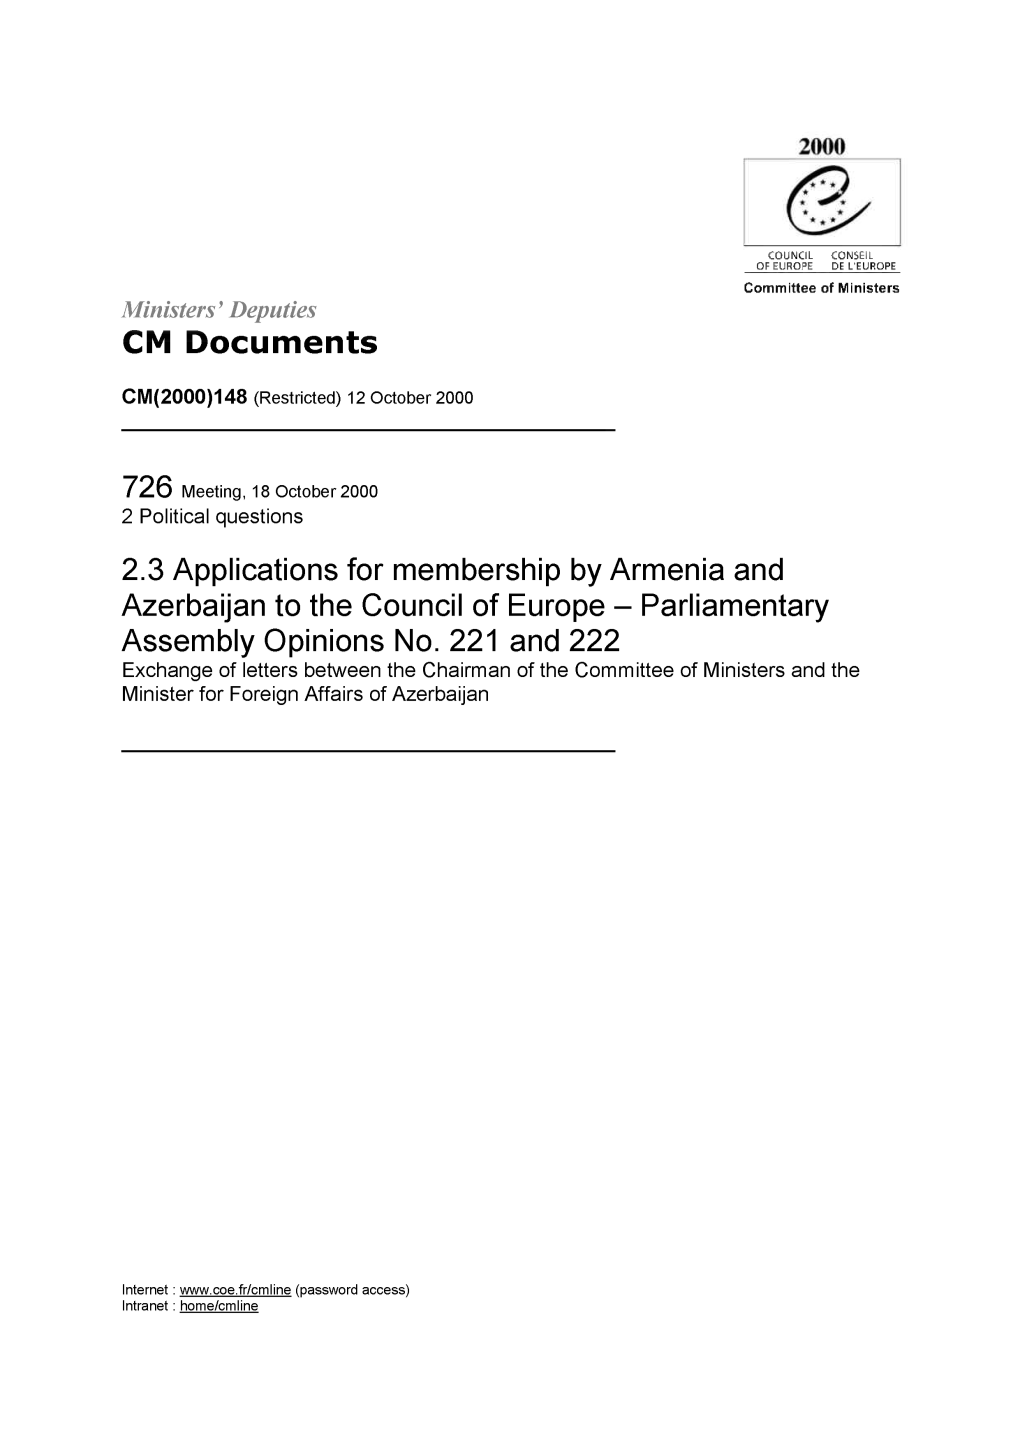 Applications for Membership by Armenia and Azerbaijan to the Council of Europe - Parliamentary Assembly Opinions No